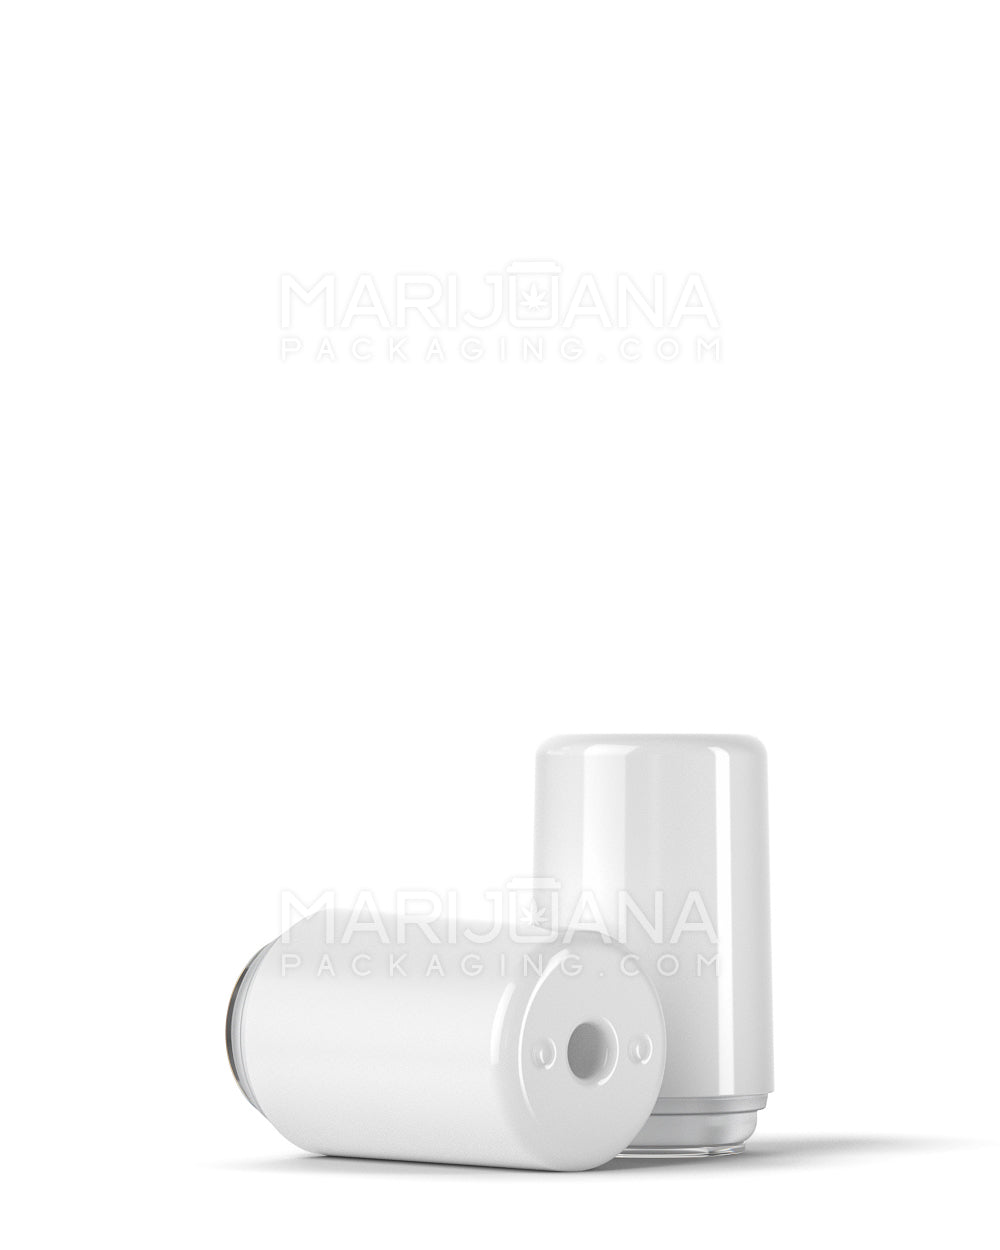 RAE | Round Vape Mouthpiece for Hand Press Plastic Cartridges | White Plastic - Hand Press - 100 Count